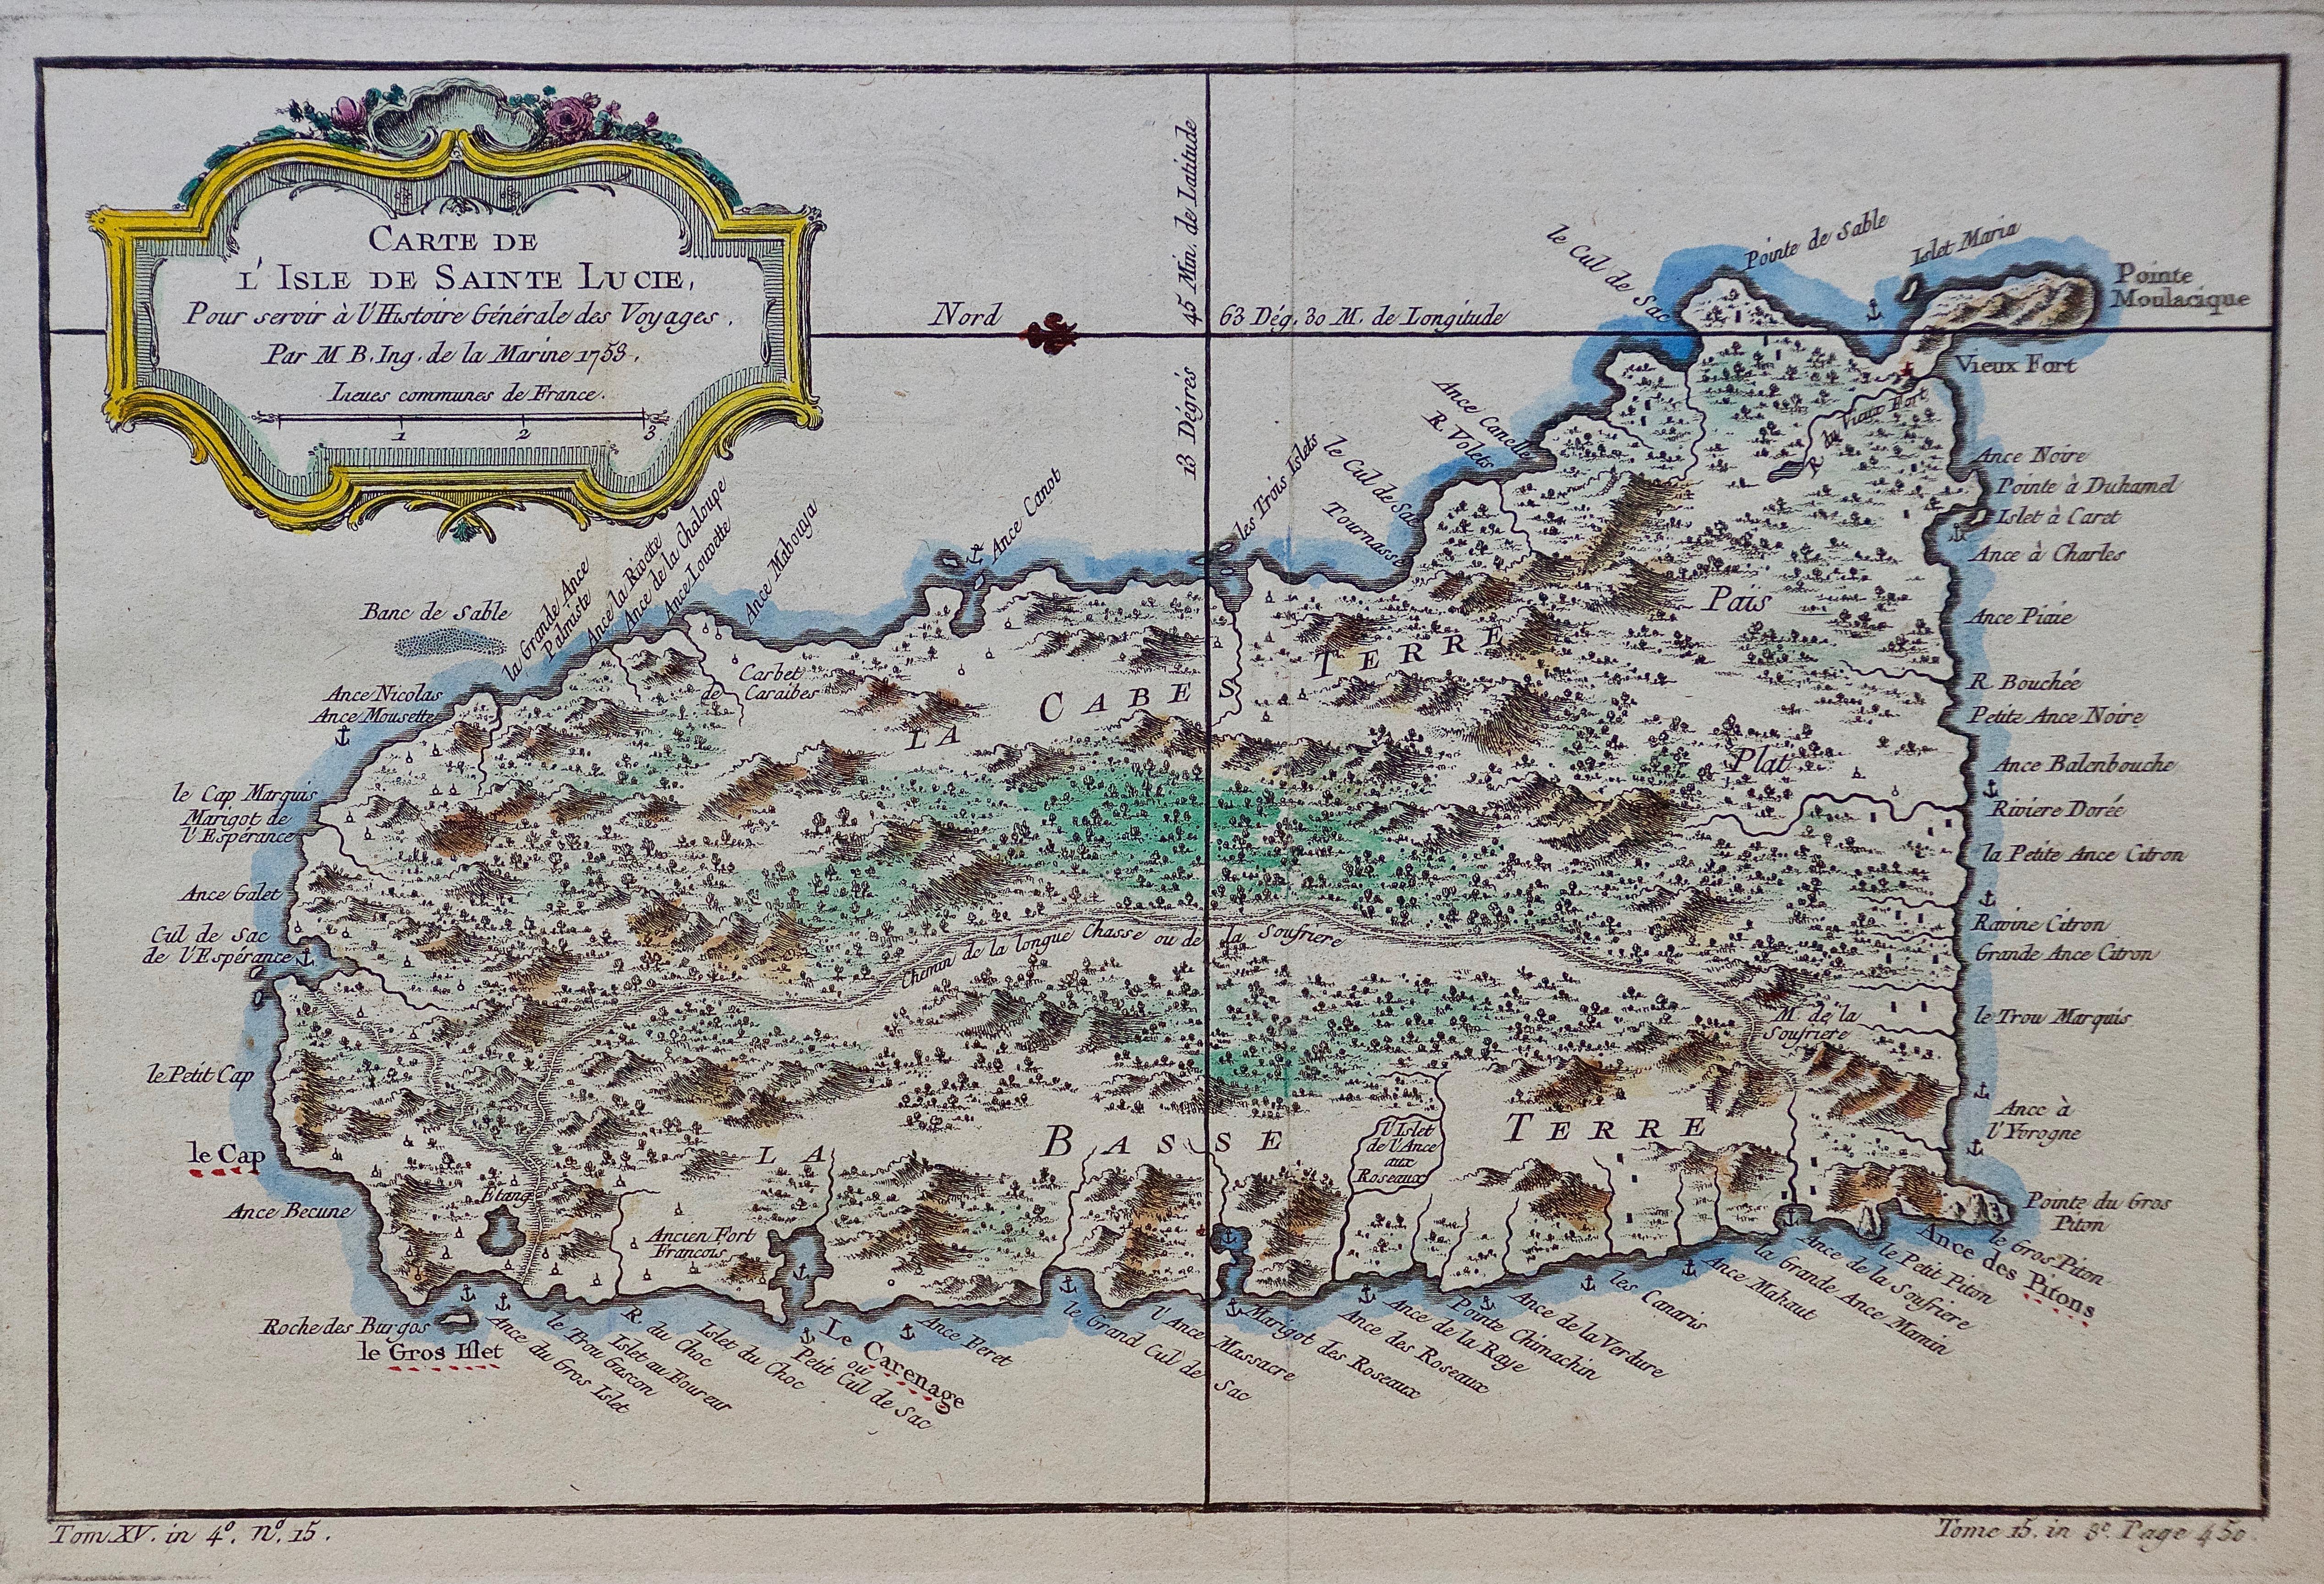 Jacques Bellin's map of the Caribbean island of Saint Lucia entitled 